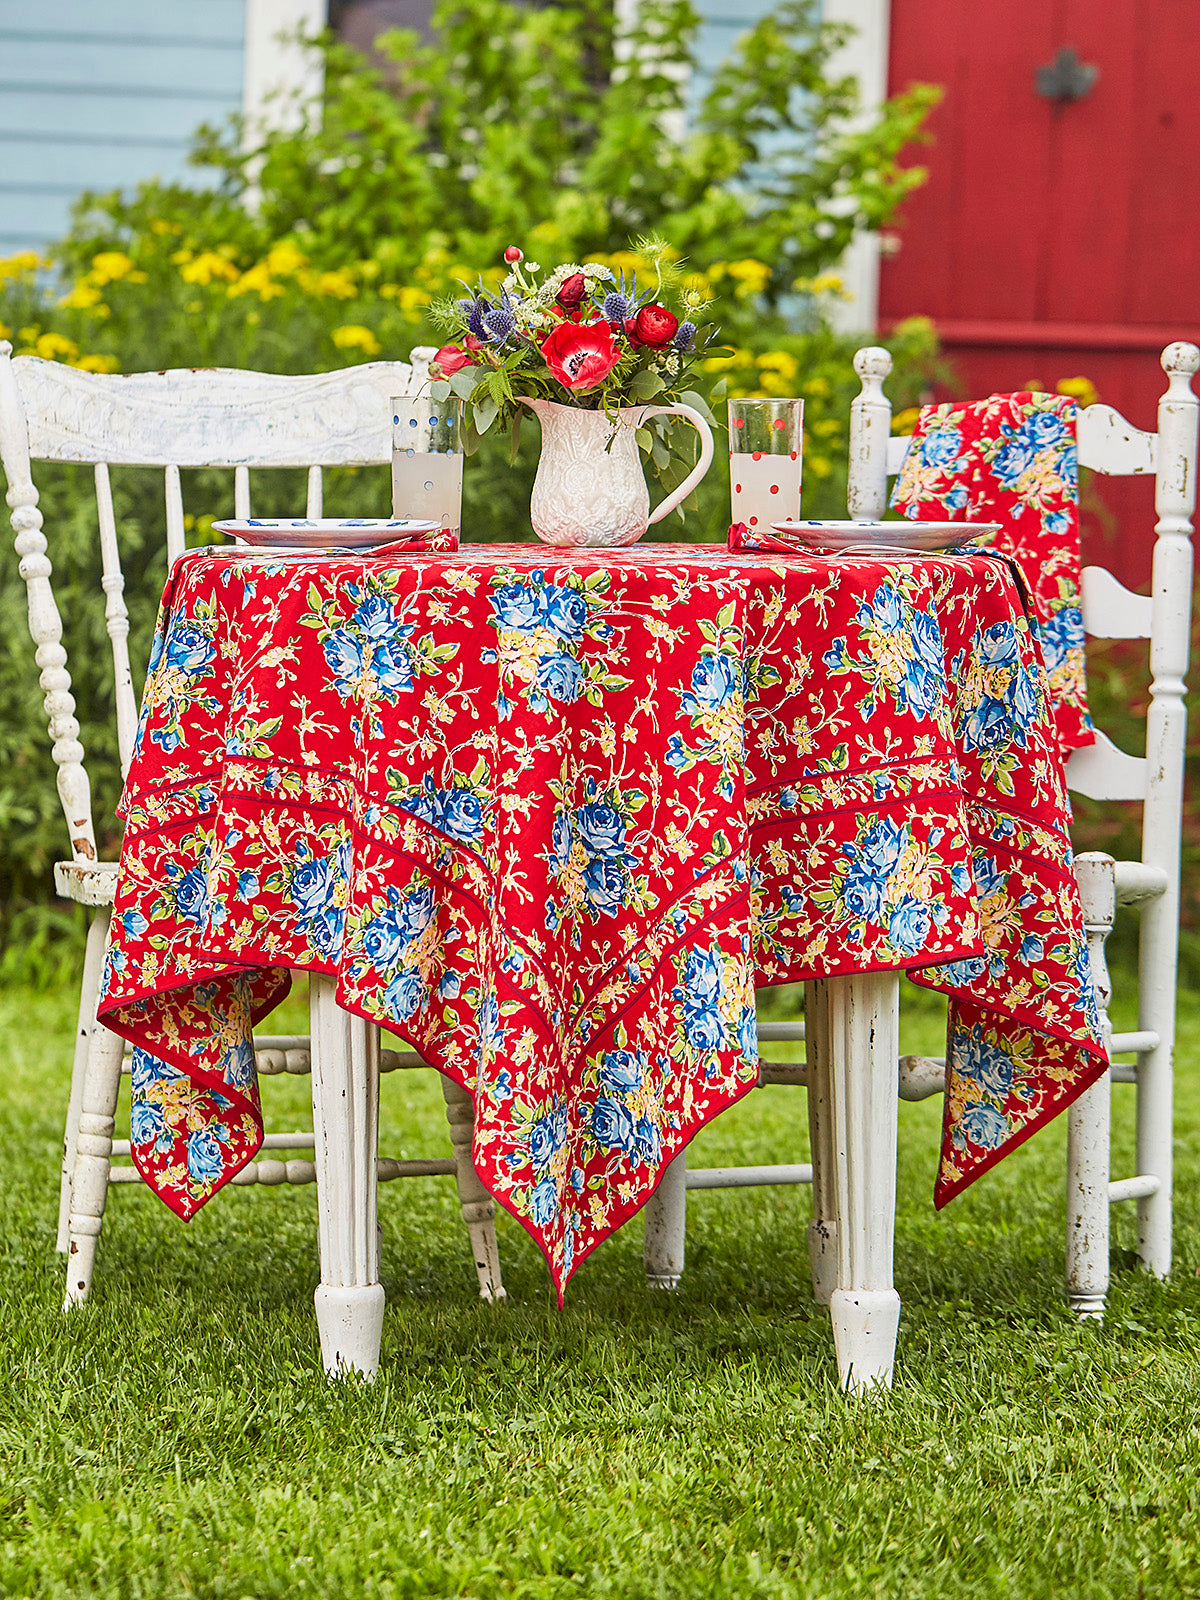 April Cornell - Red Viola Rose Tablecloth